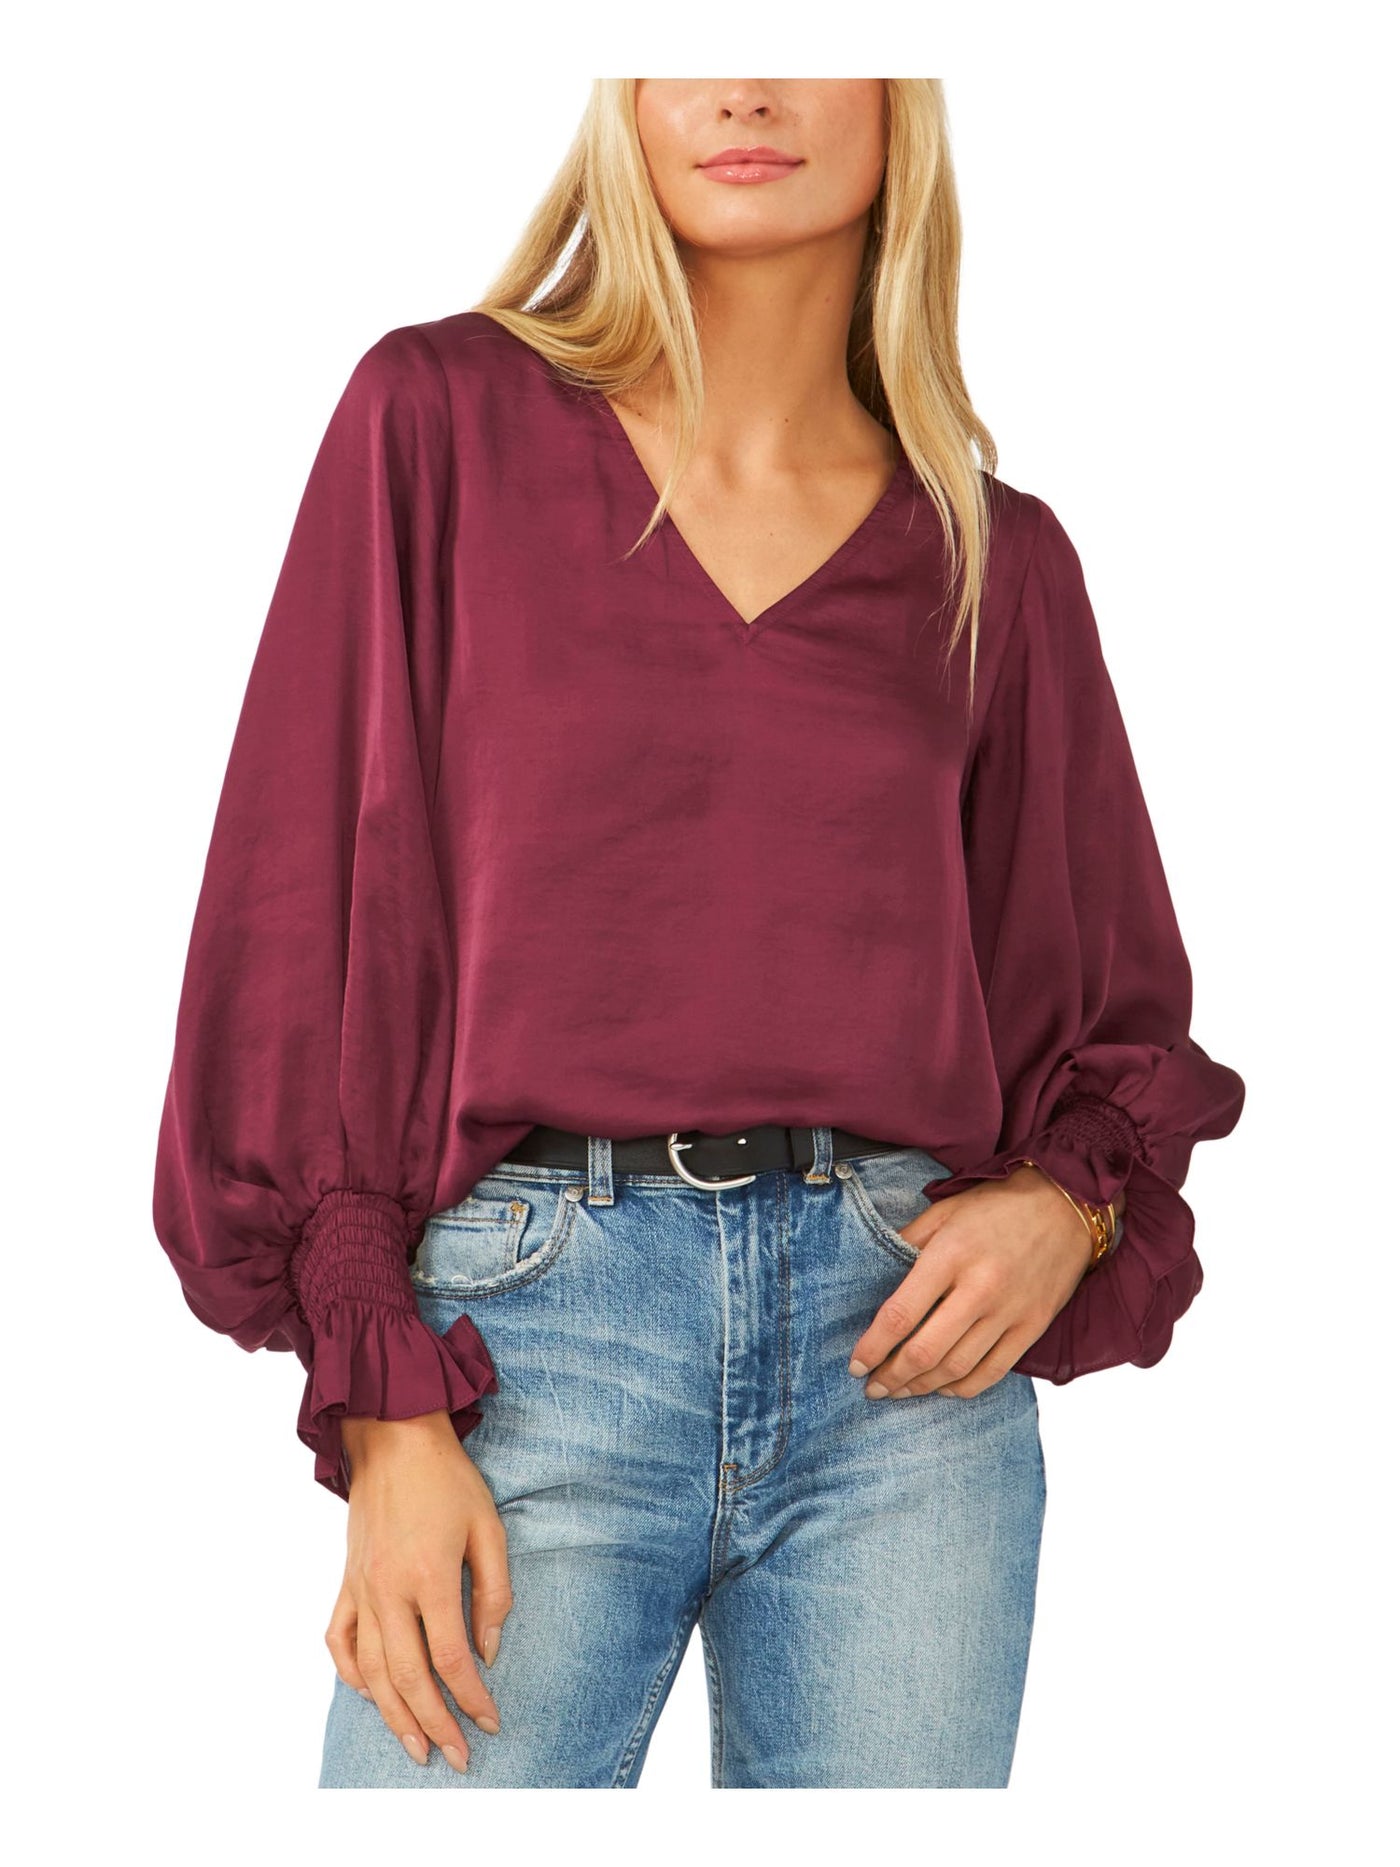 VINCE CAMUTO Womens Burgundy Ruffled Smocked Pouf Sleeve V Neck Top XS